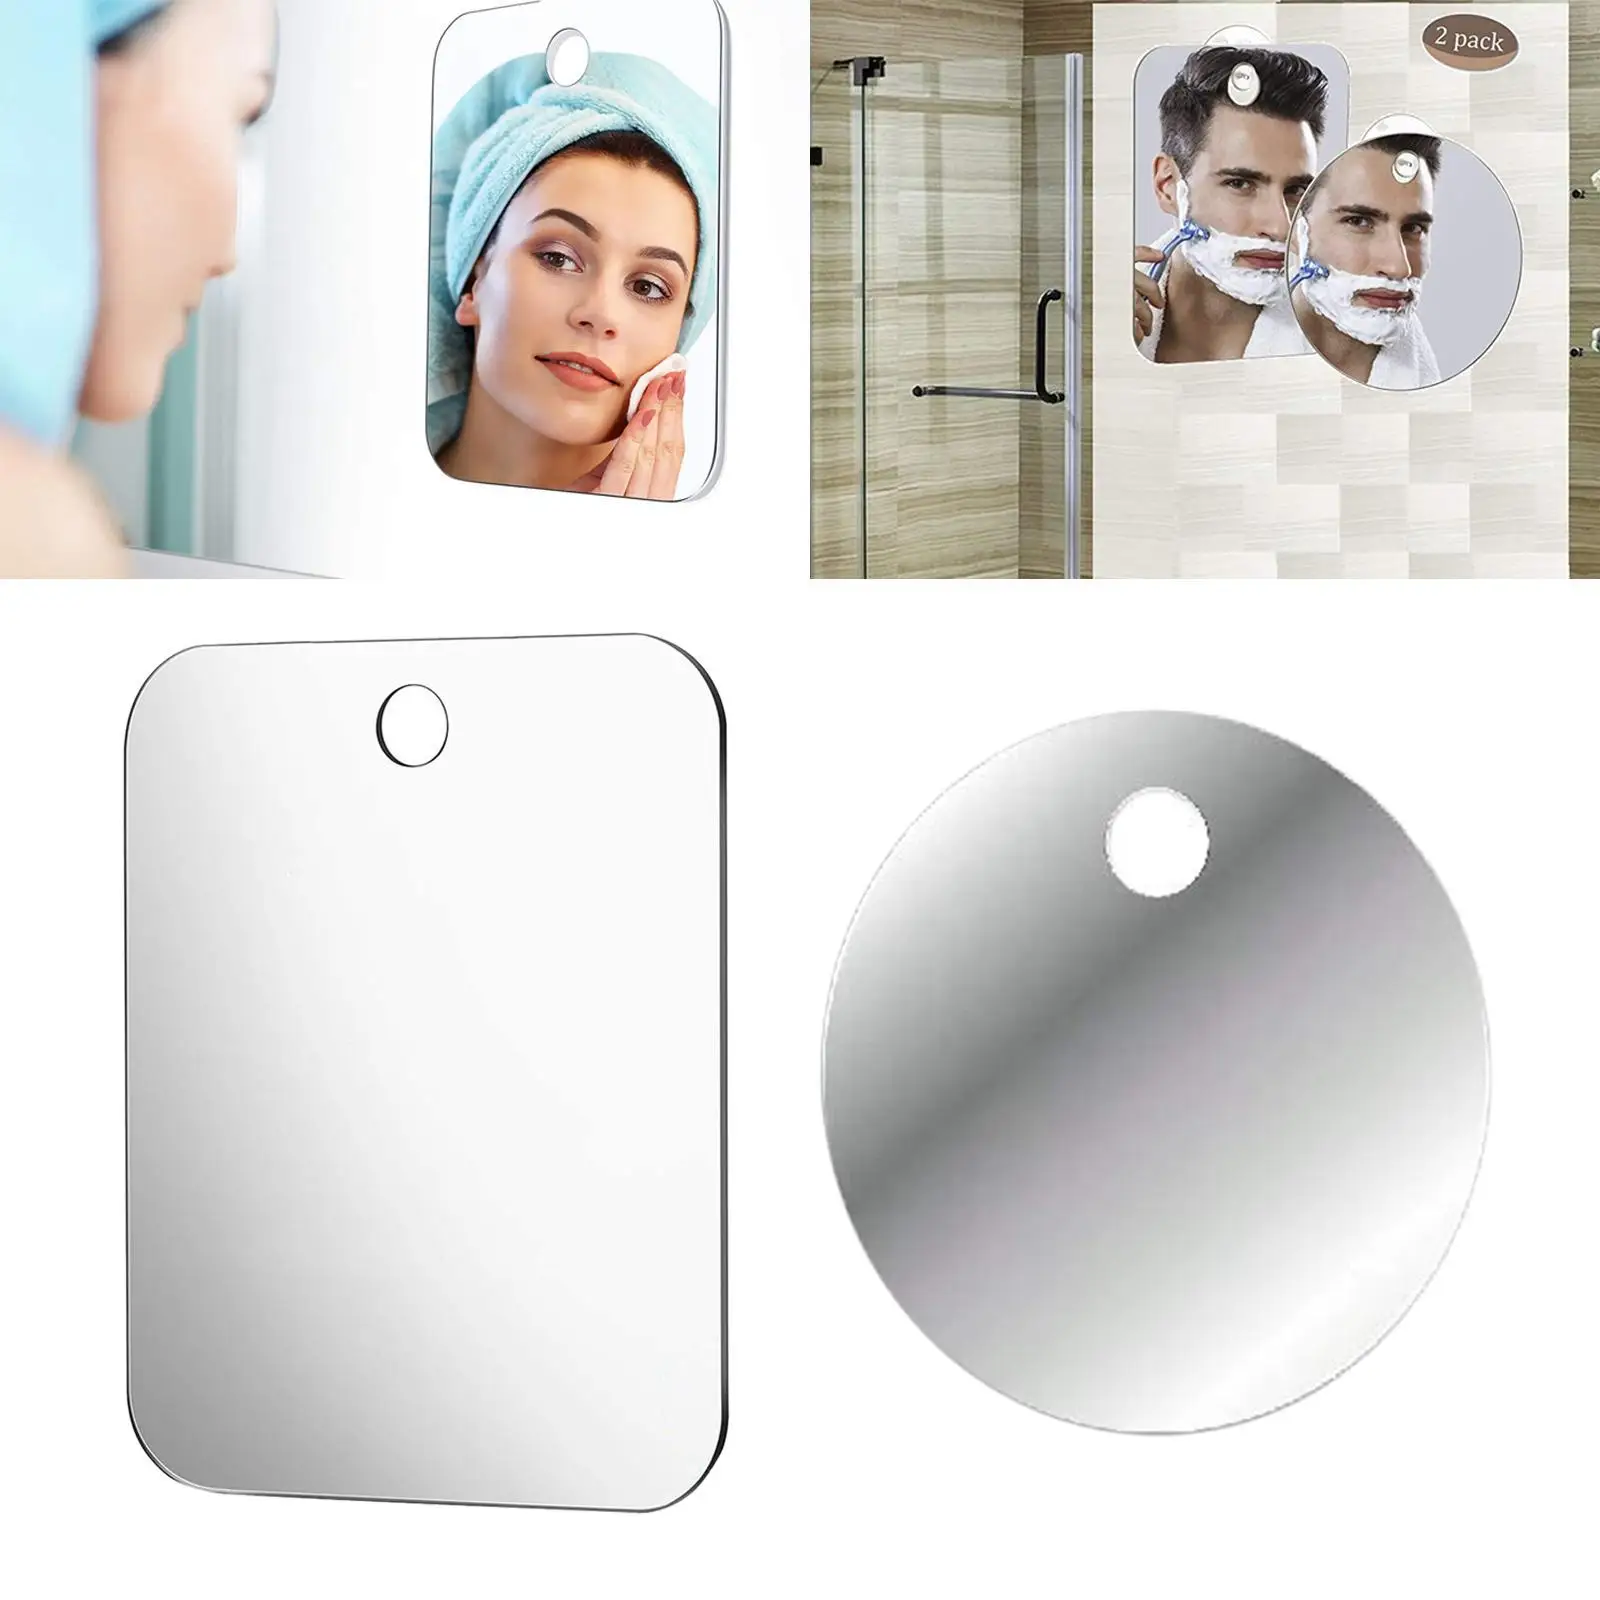 Shower Mirror, Shaving Mirror with Suction Cup - Shatterproof Anti Fog Mirror for Shower and Tweezers